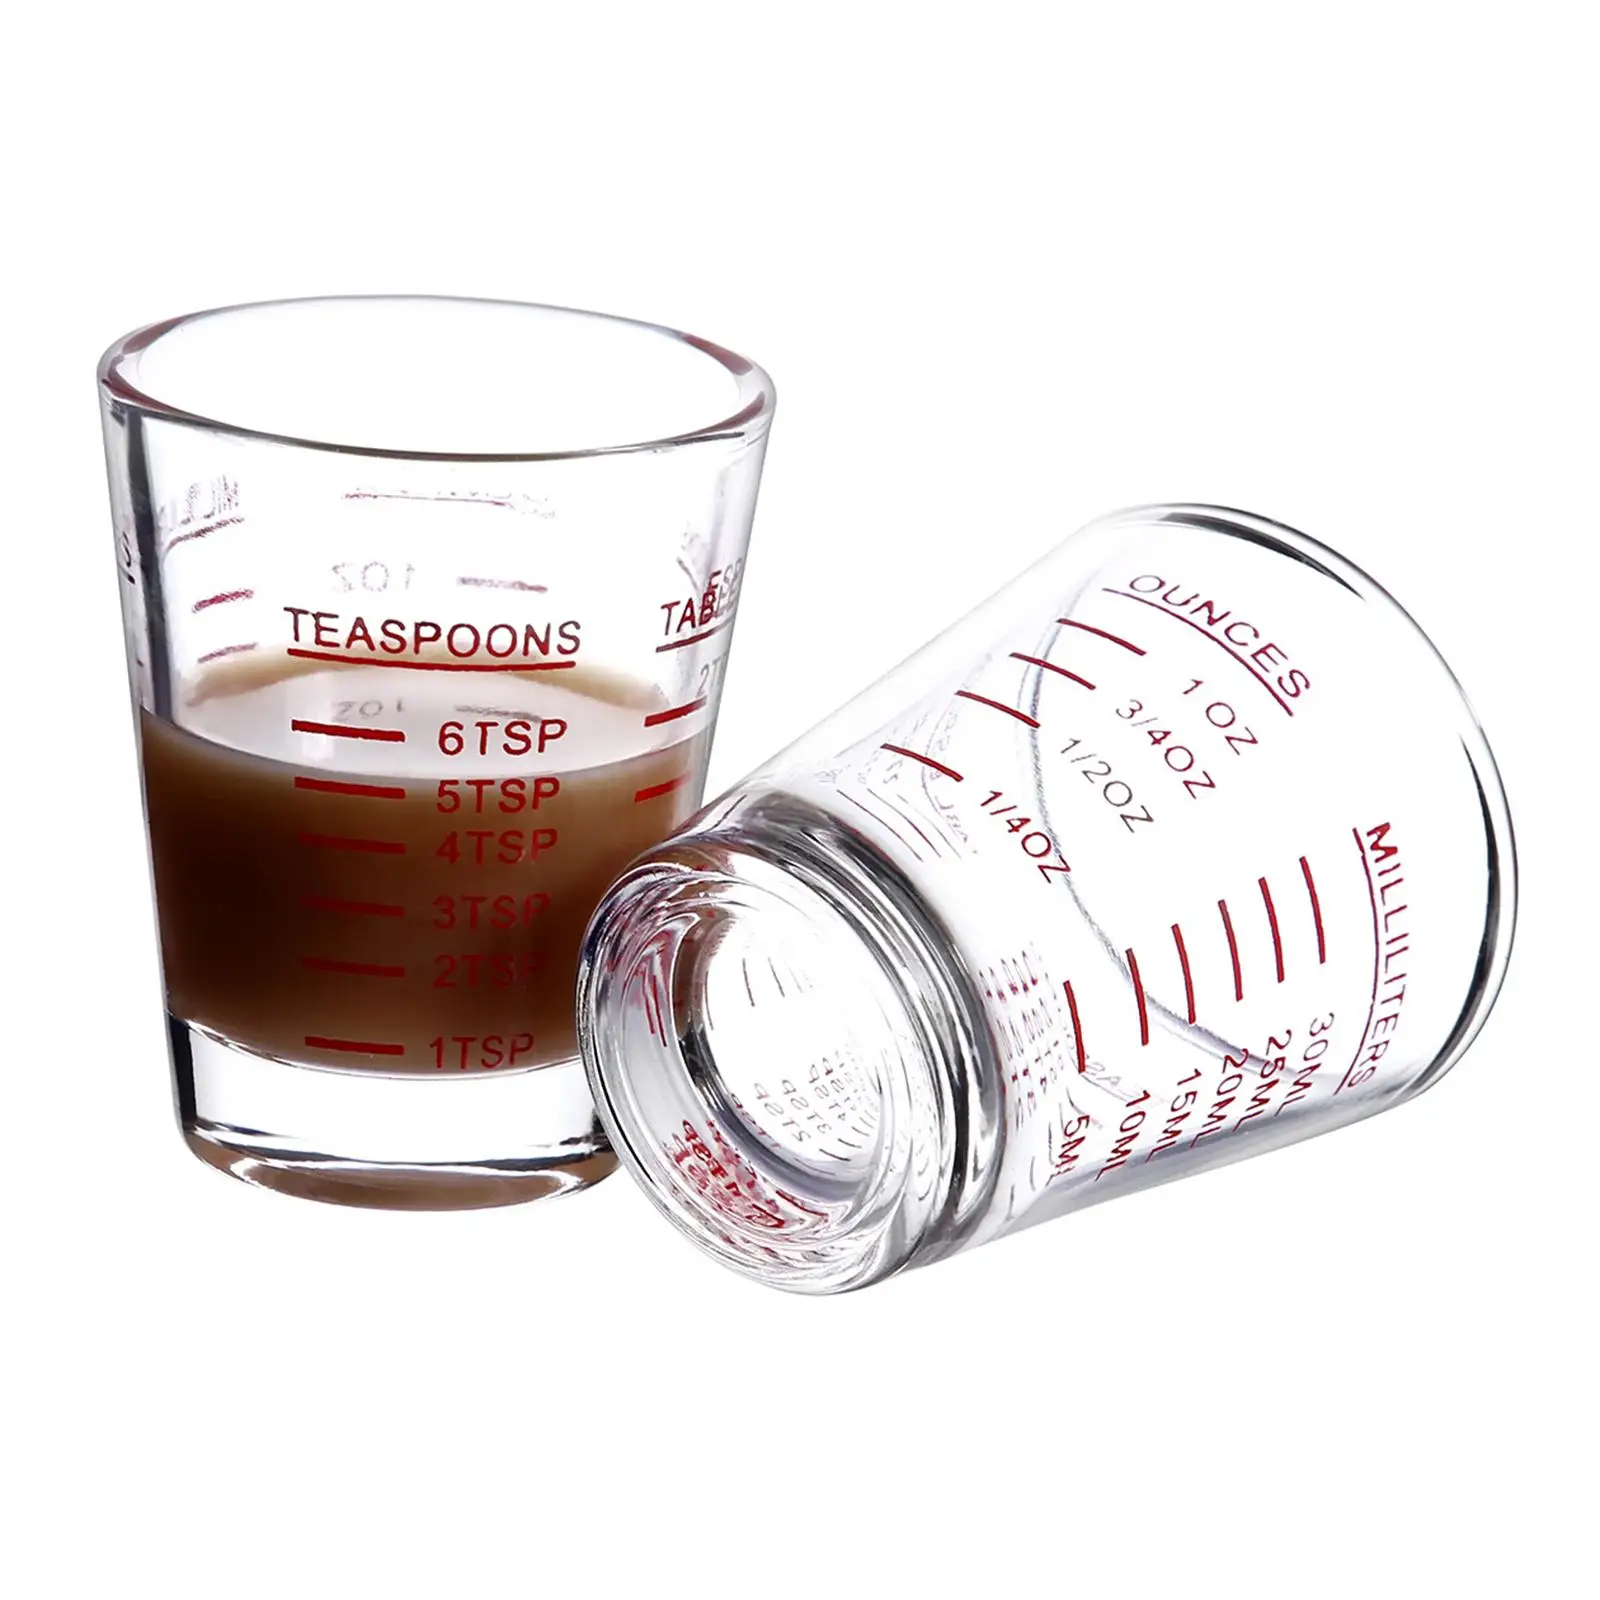 https://ae01.alicdn.com/kf/S21573a6aa07c4899903499d88e6470cfr/2x-Glass-Measuring-Cup-Mini-Measure-Heavy-Glass-Shot-Glasses-Measuring-Cup-for-Home-Cafe.jpg